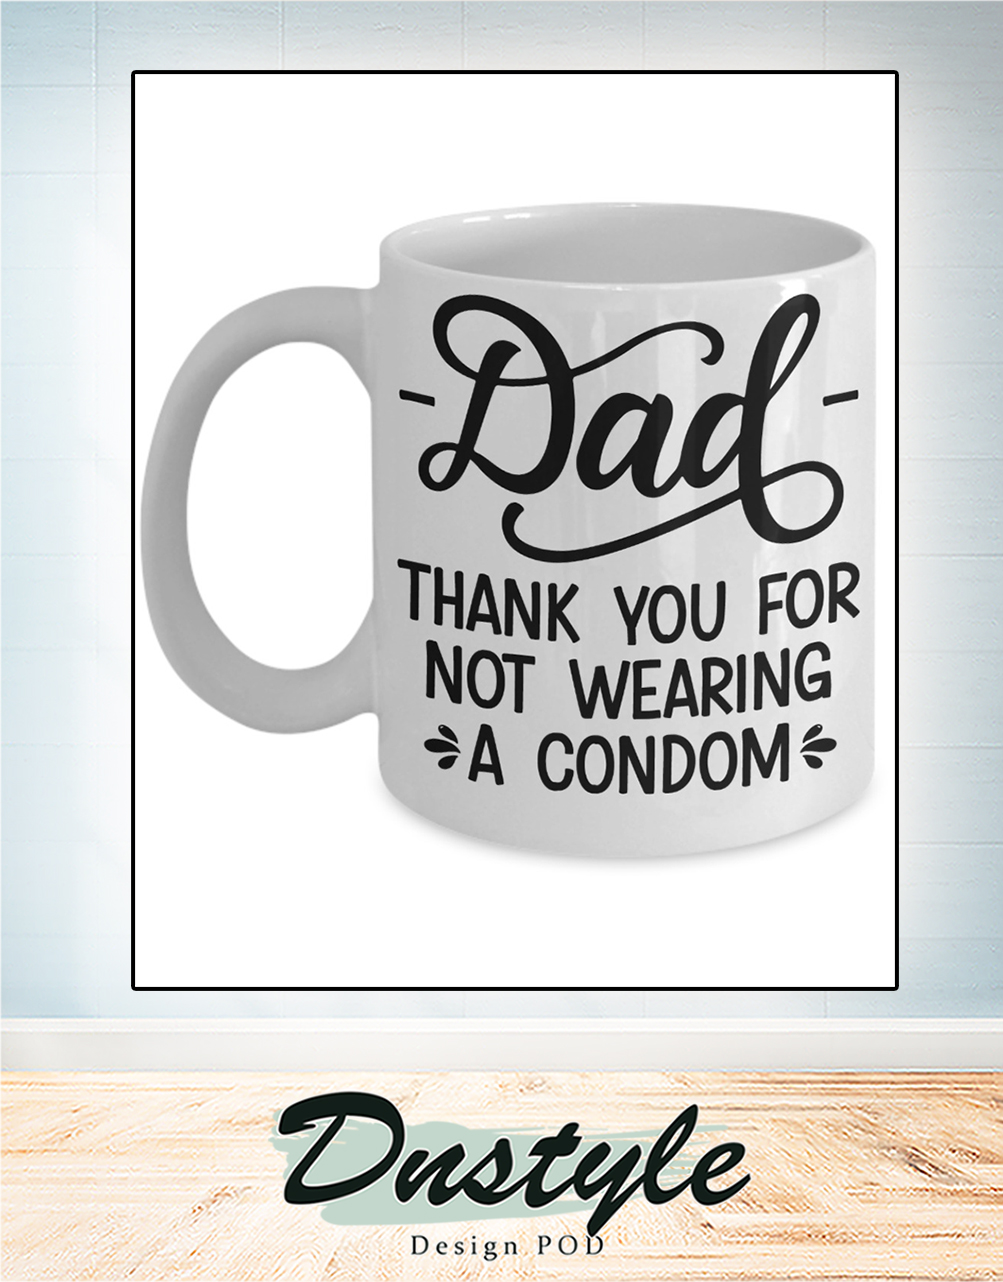 Dad thank you for not wearing a condom mug